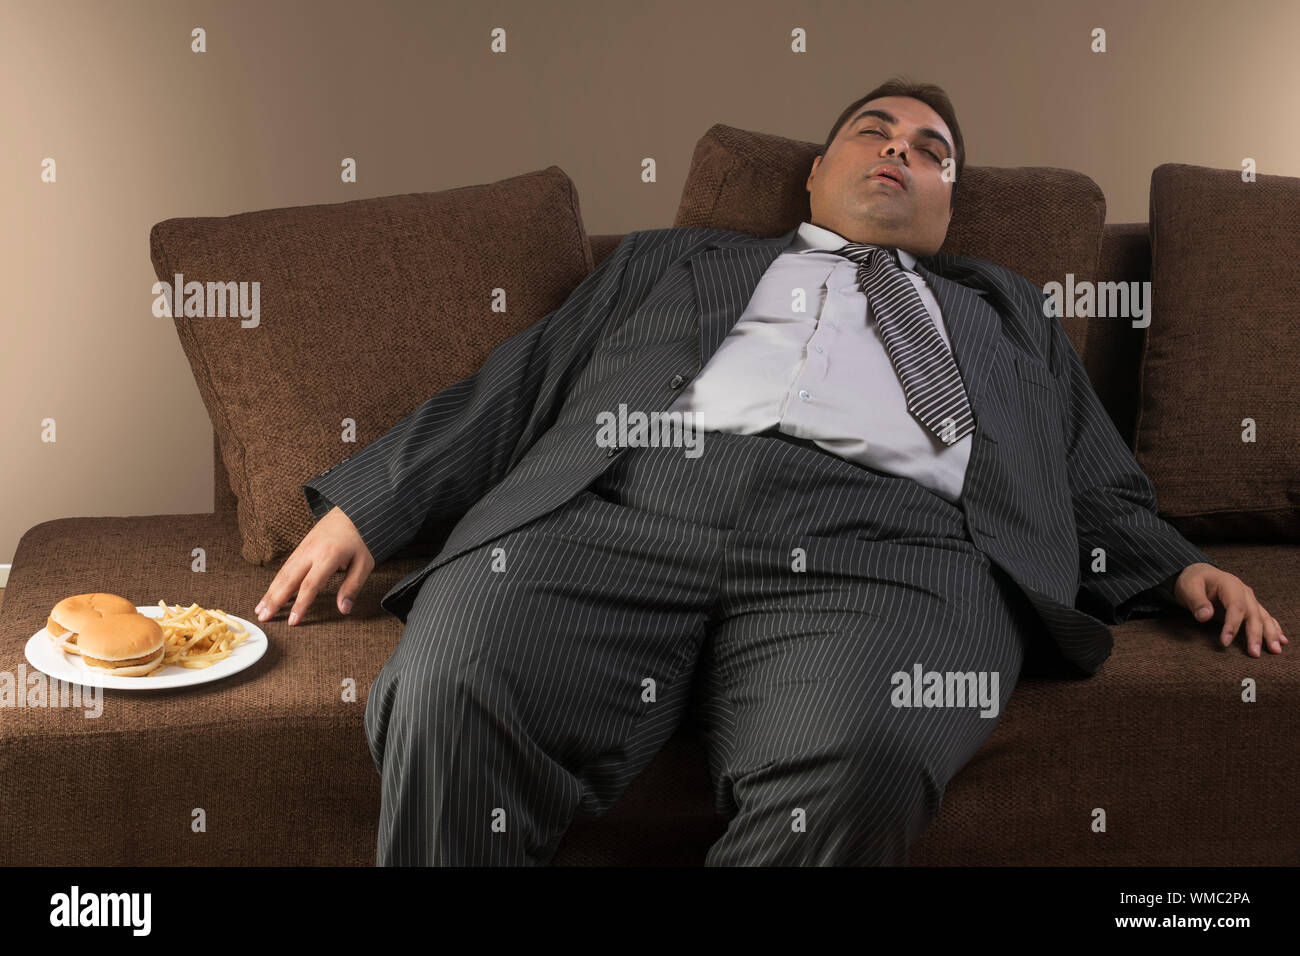 Obese man in formal clothes sleeping on sofa with plate of burgers and french fries by his side Stock Photo